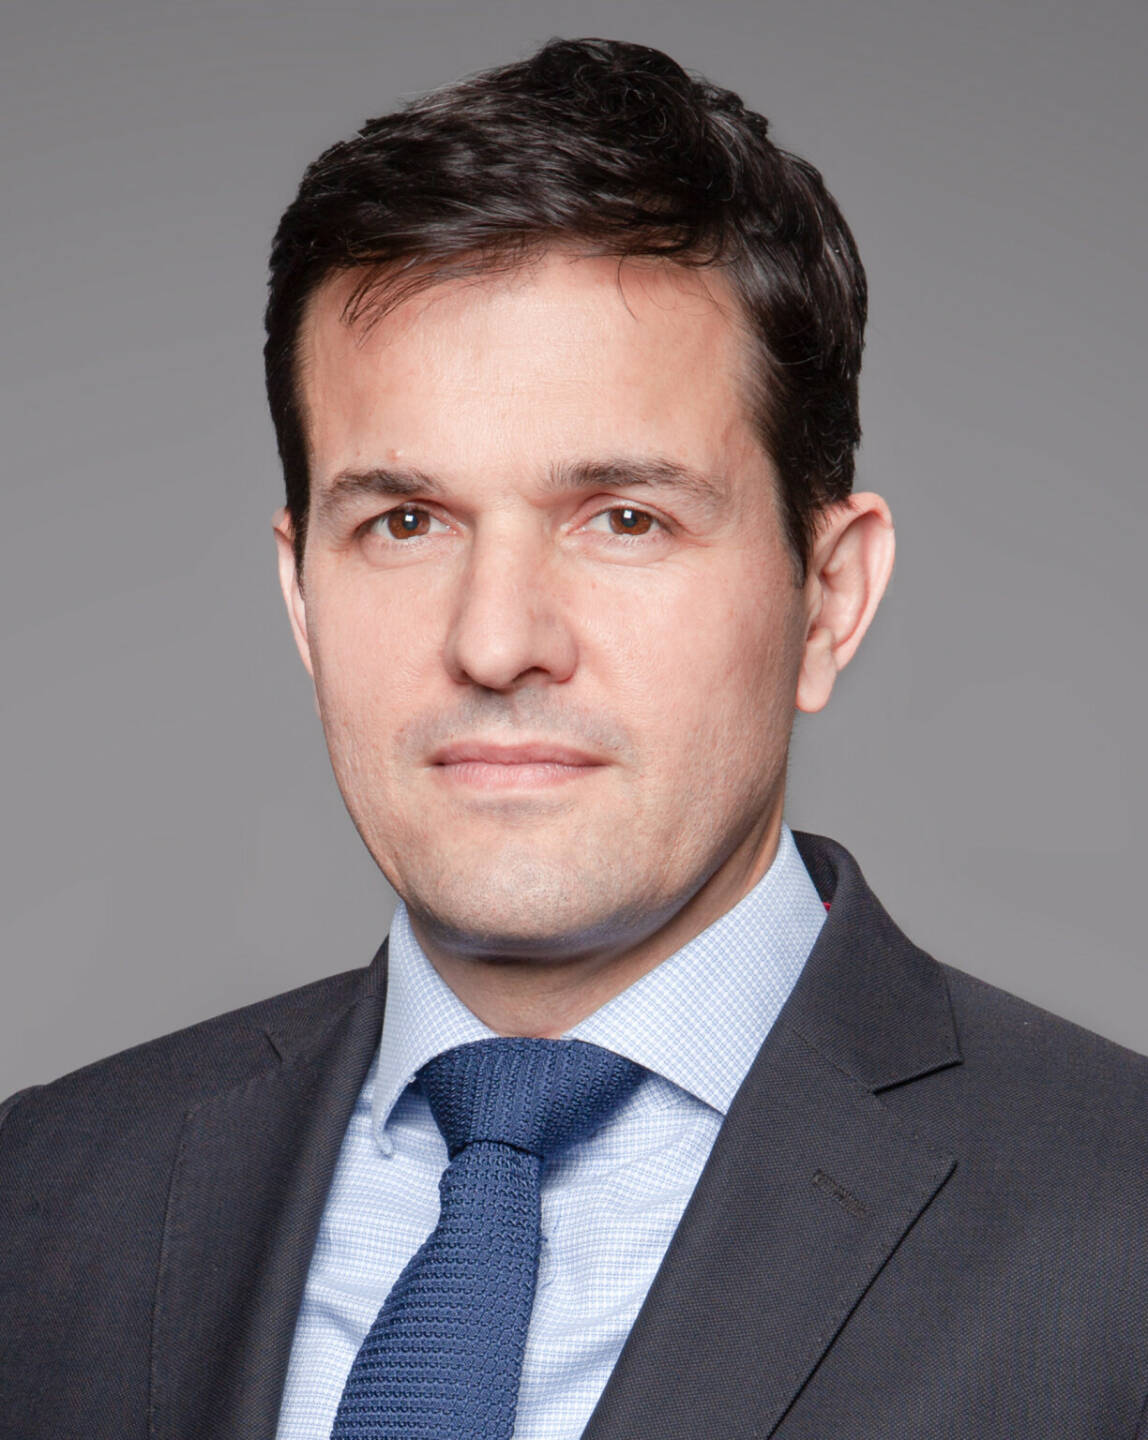 Pascal Menges, Head of Equity Investment Process and Research, Client Portfolio Manager, Lombard Odier Investment Managers (LOIM); Credit: LOIM